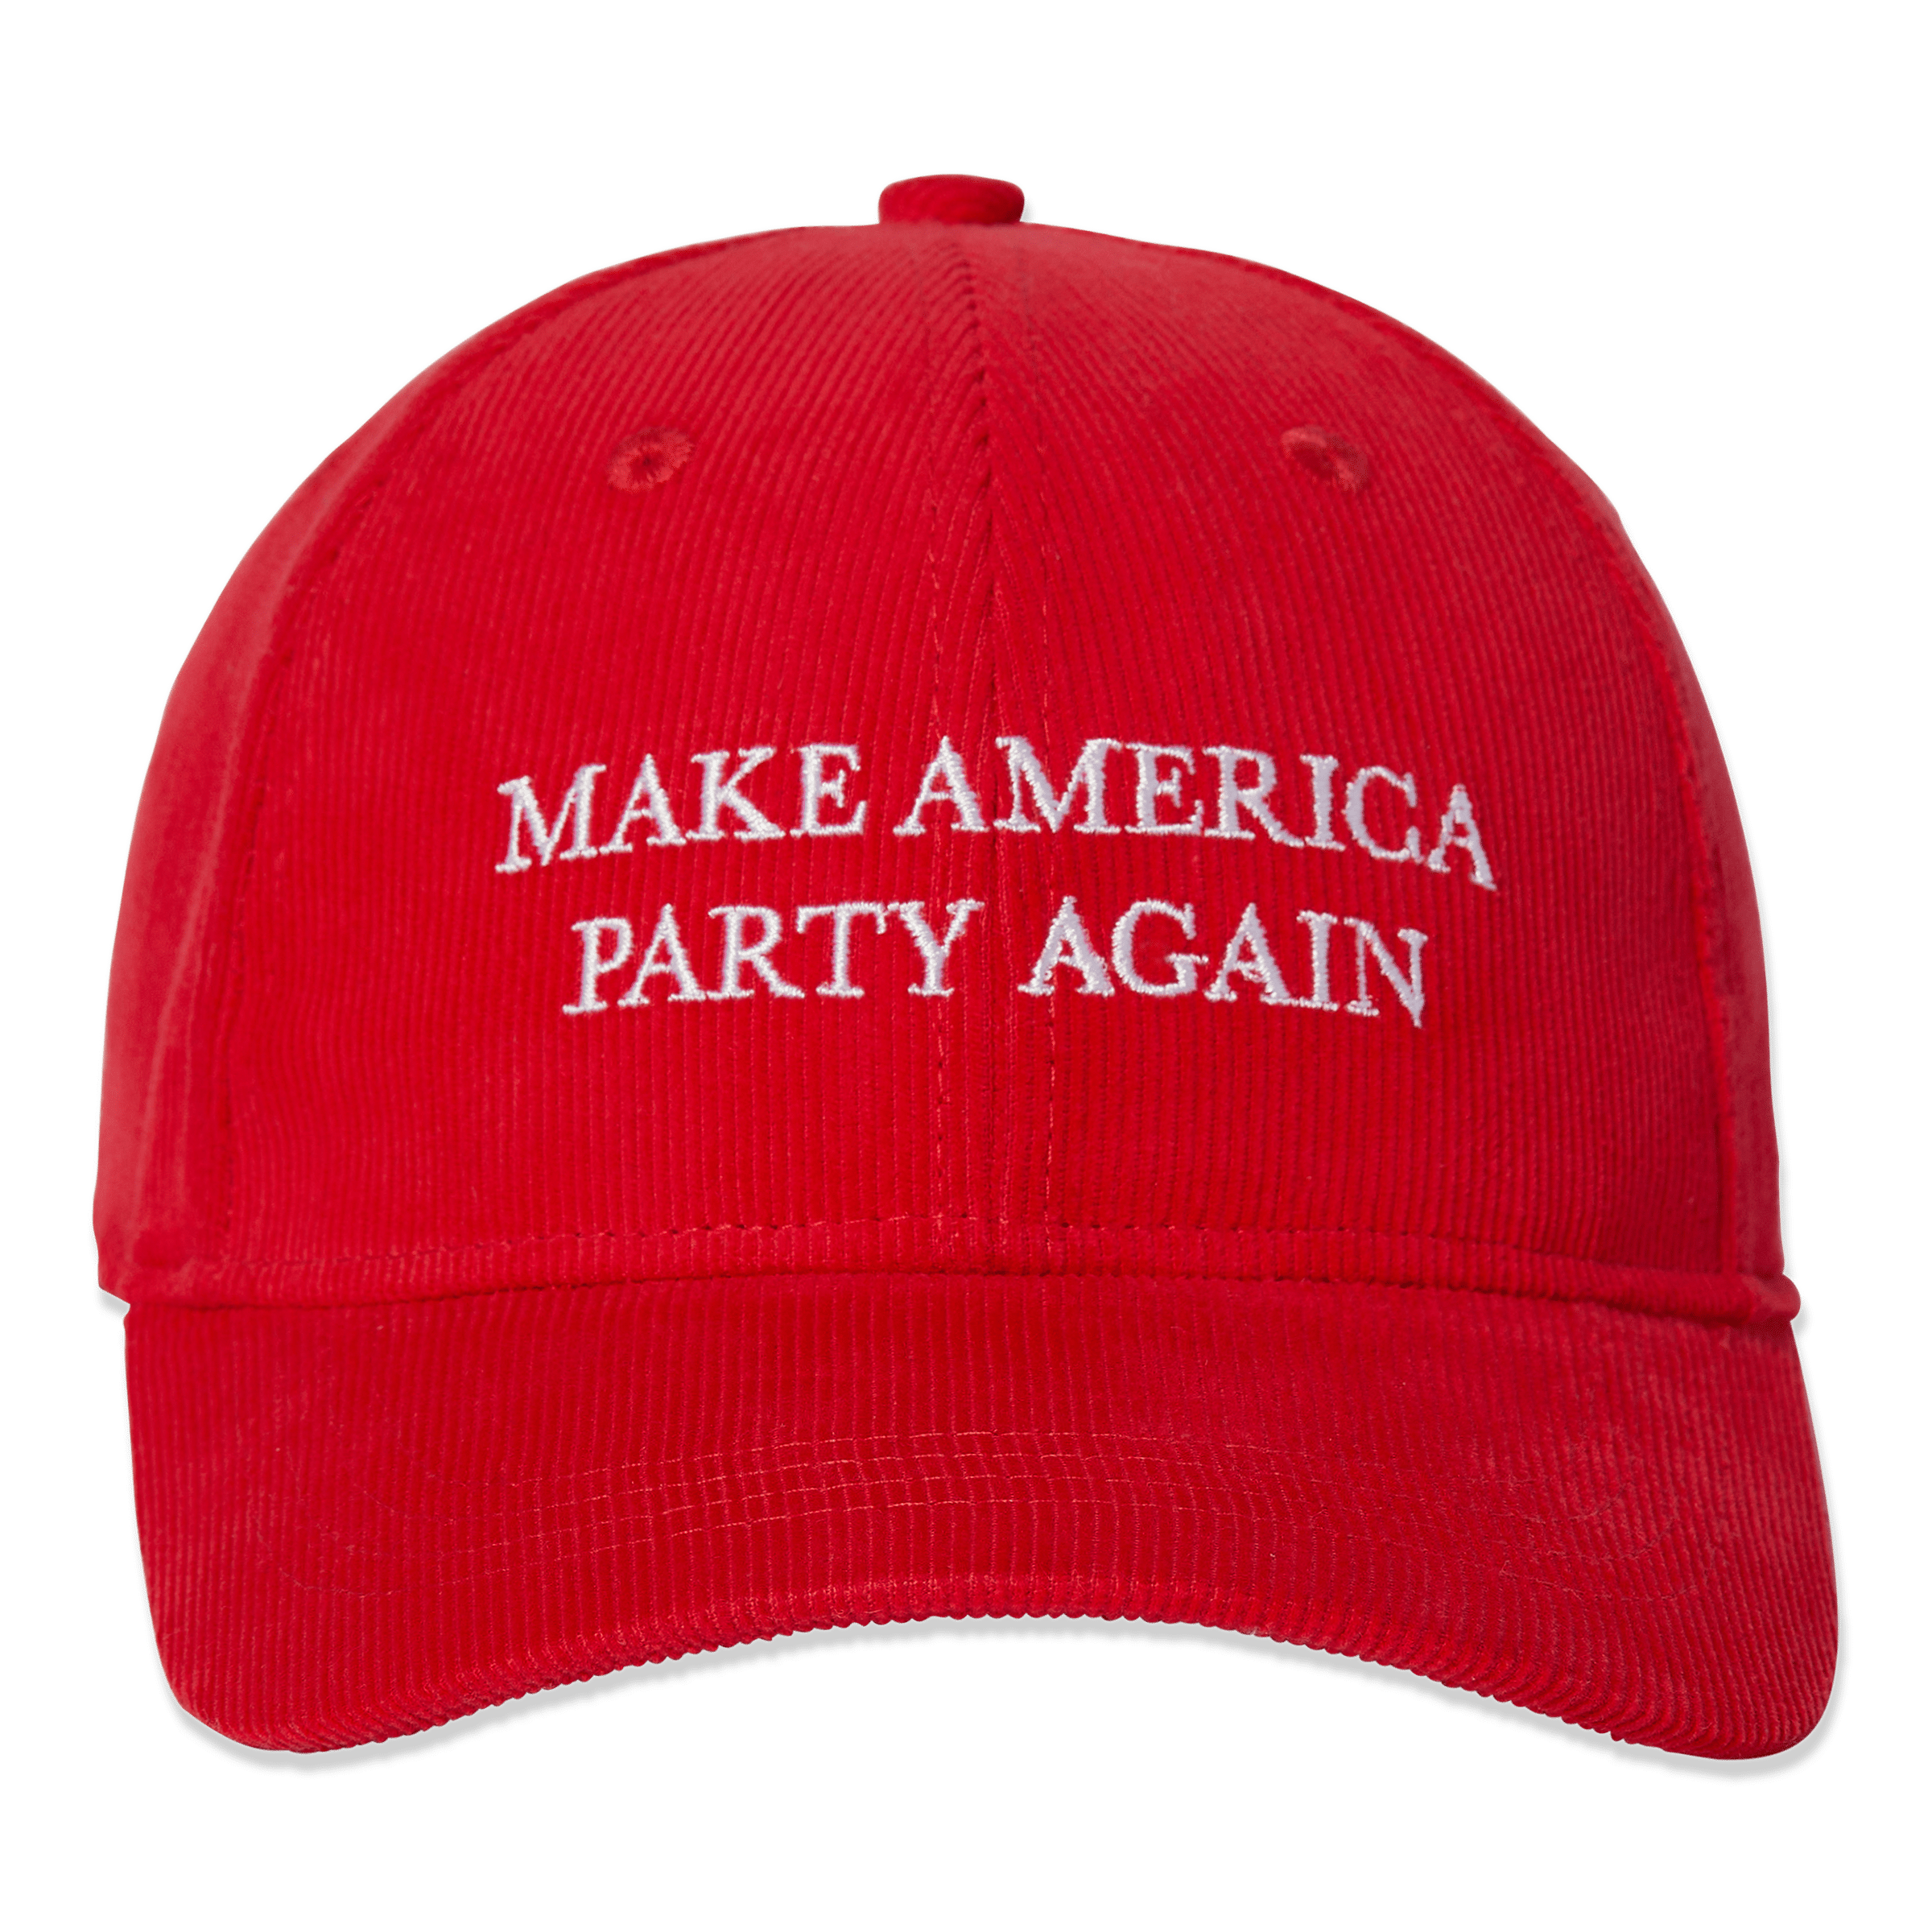 PARTY AGAIN HAT - RED HATS PARTY PANTS 